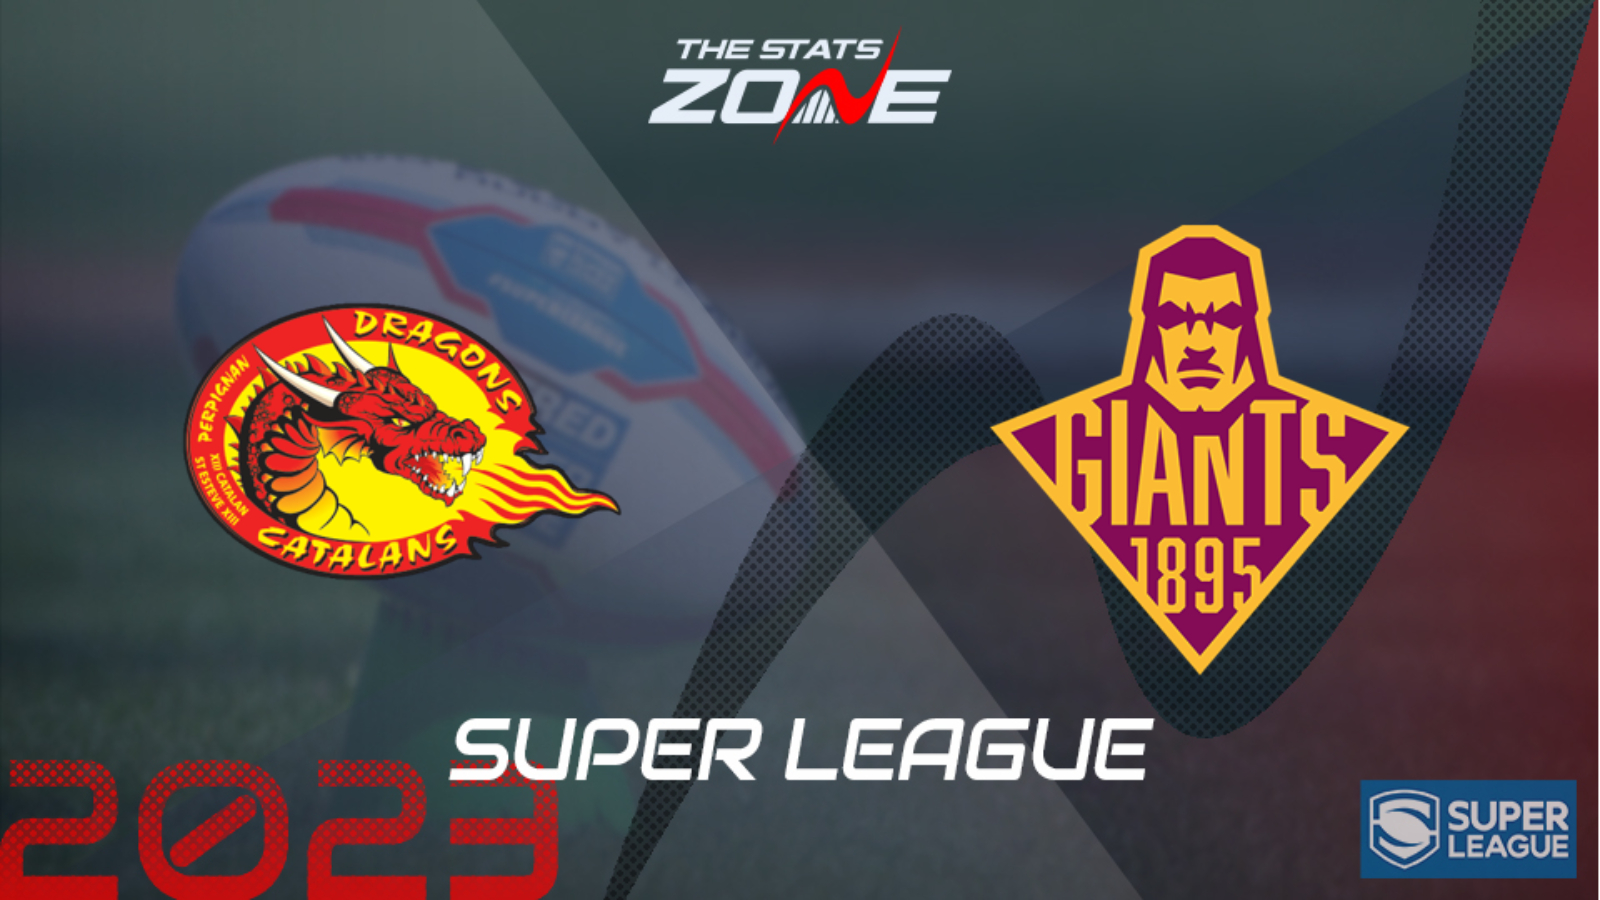 Catalans Dragons vs Huddersfield Giants – League Stage